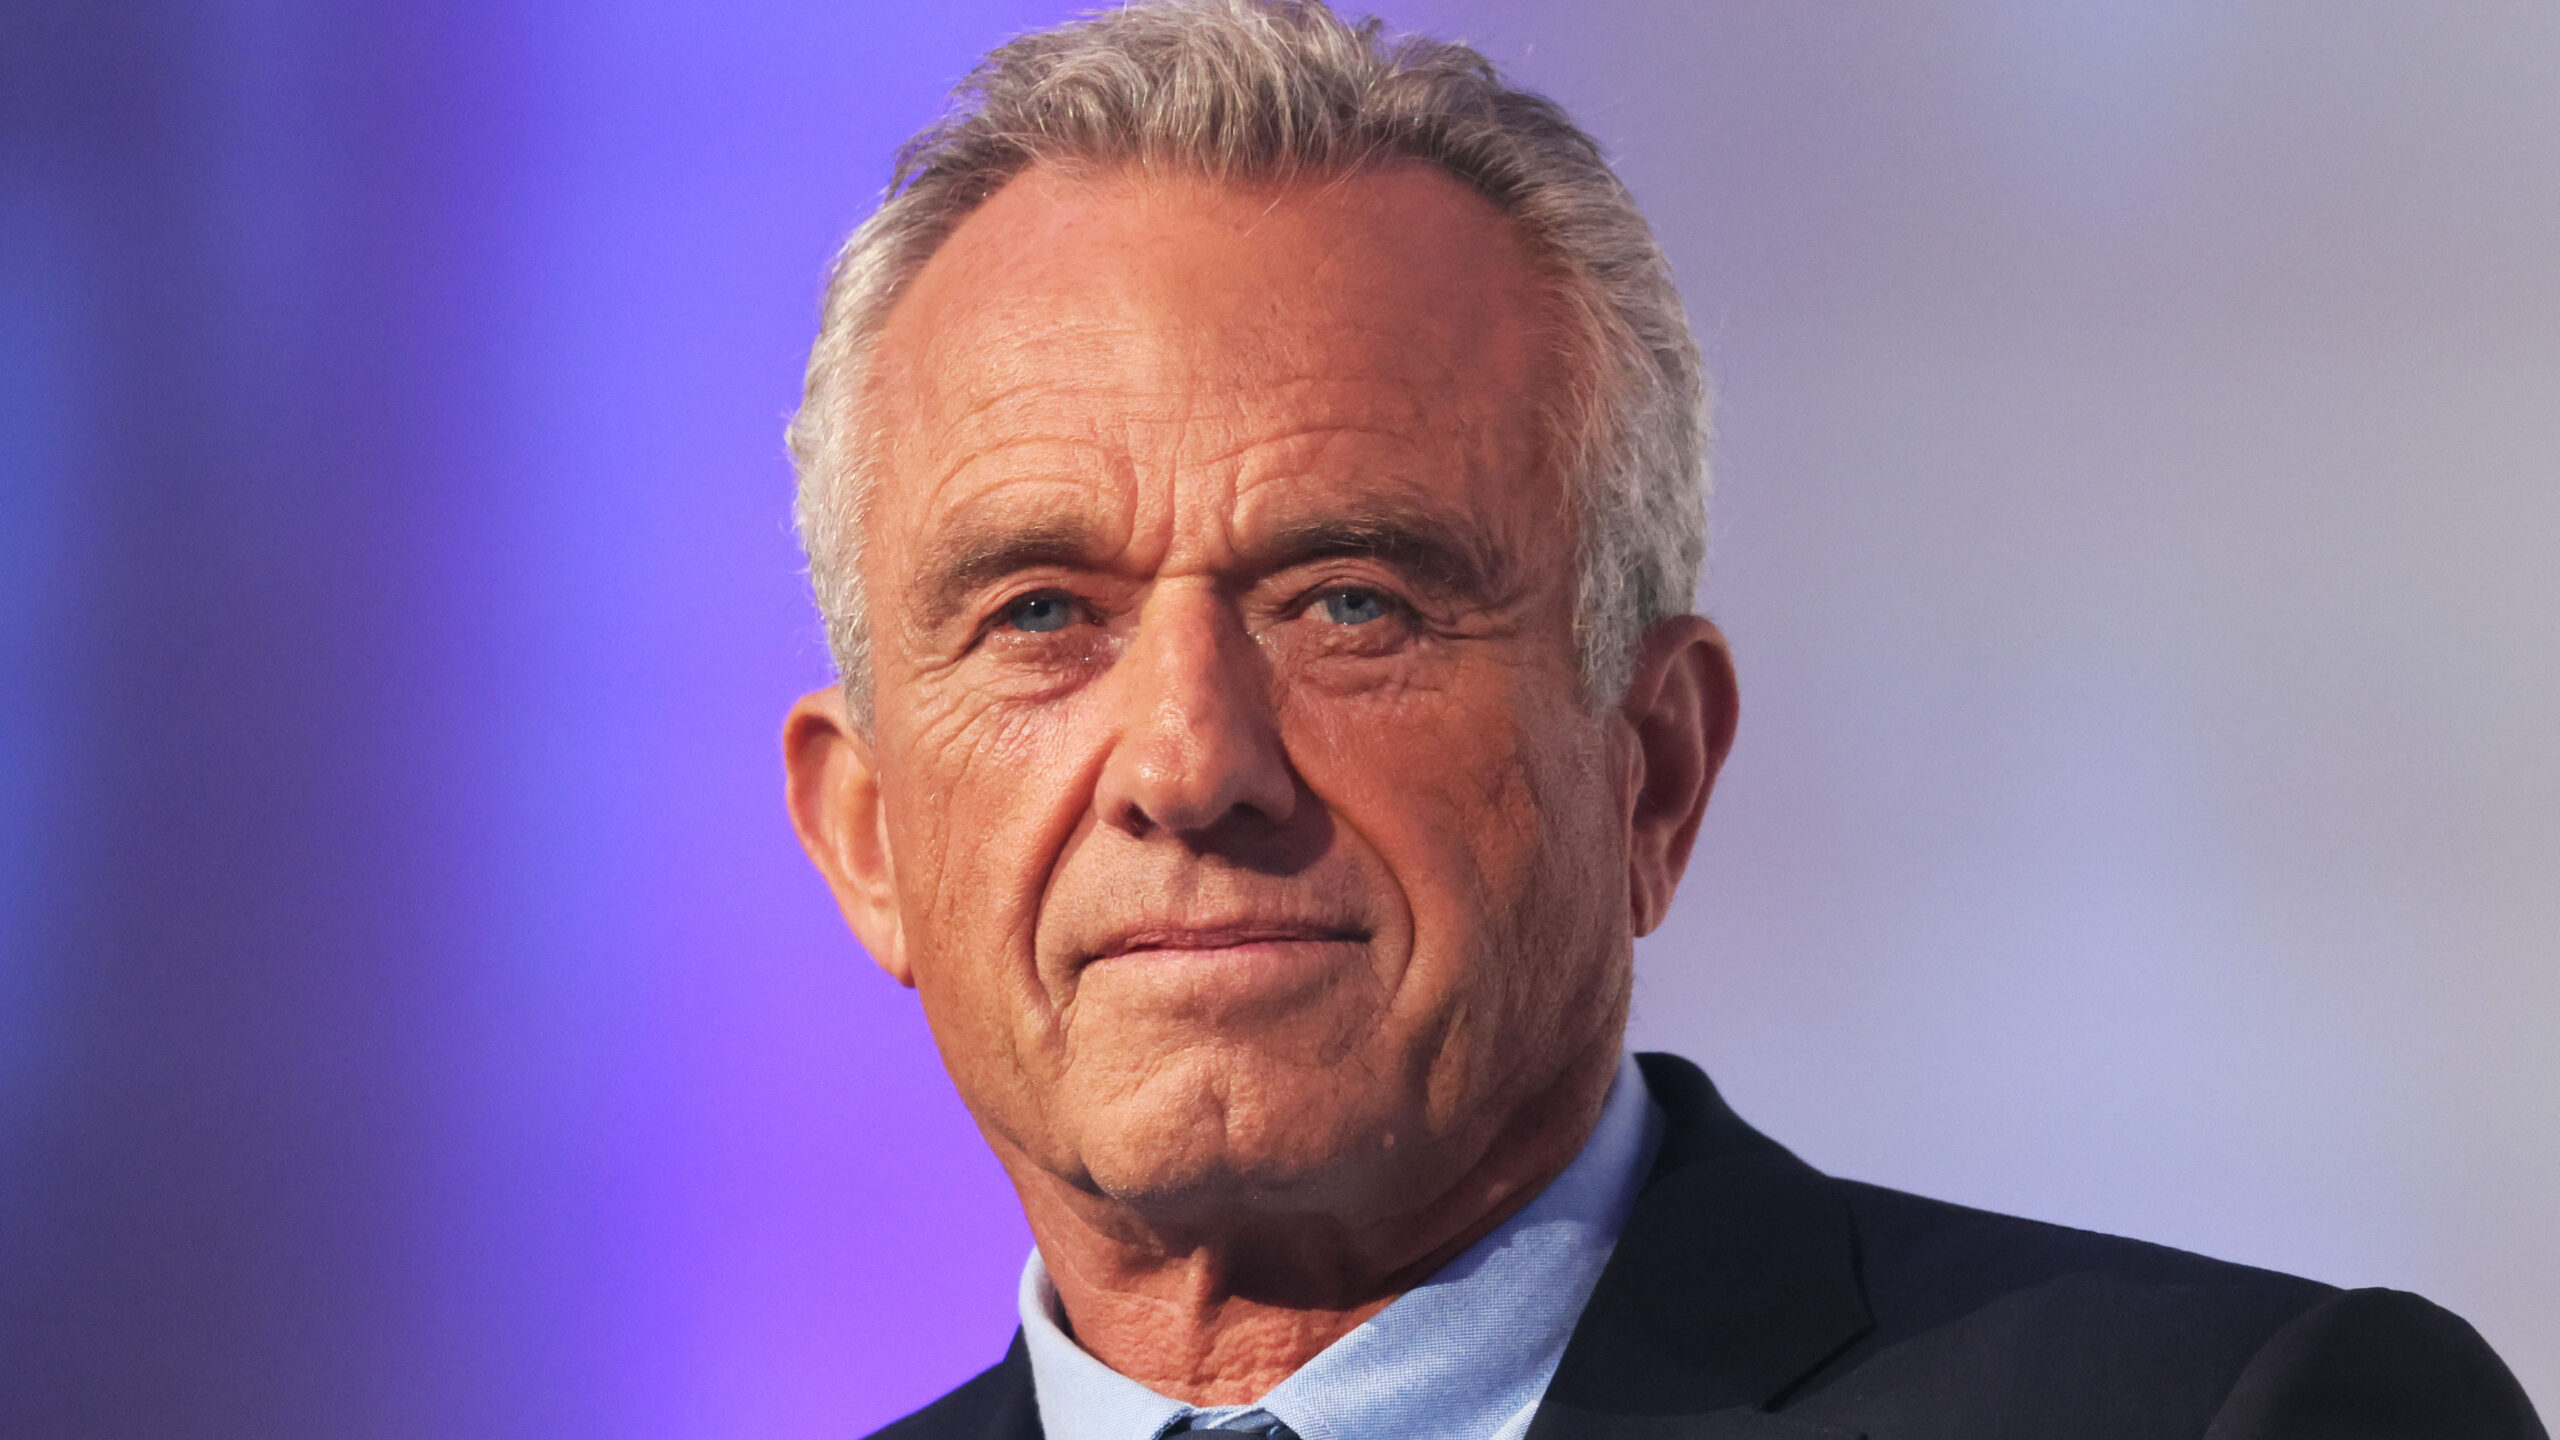 RFK Jr. To Announce That He Is Running For President As An Independent: Report